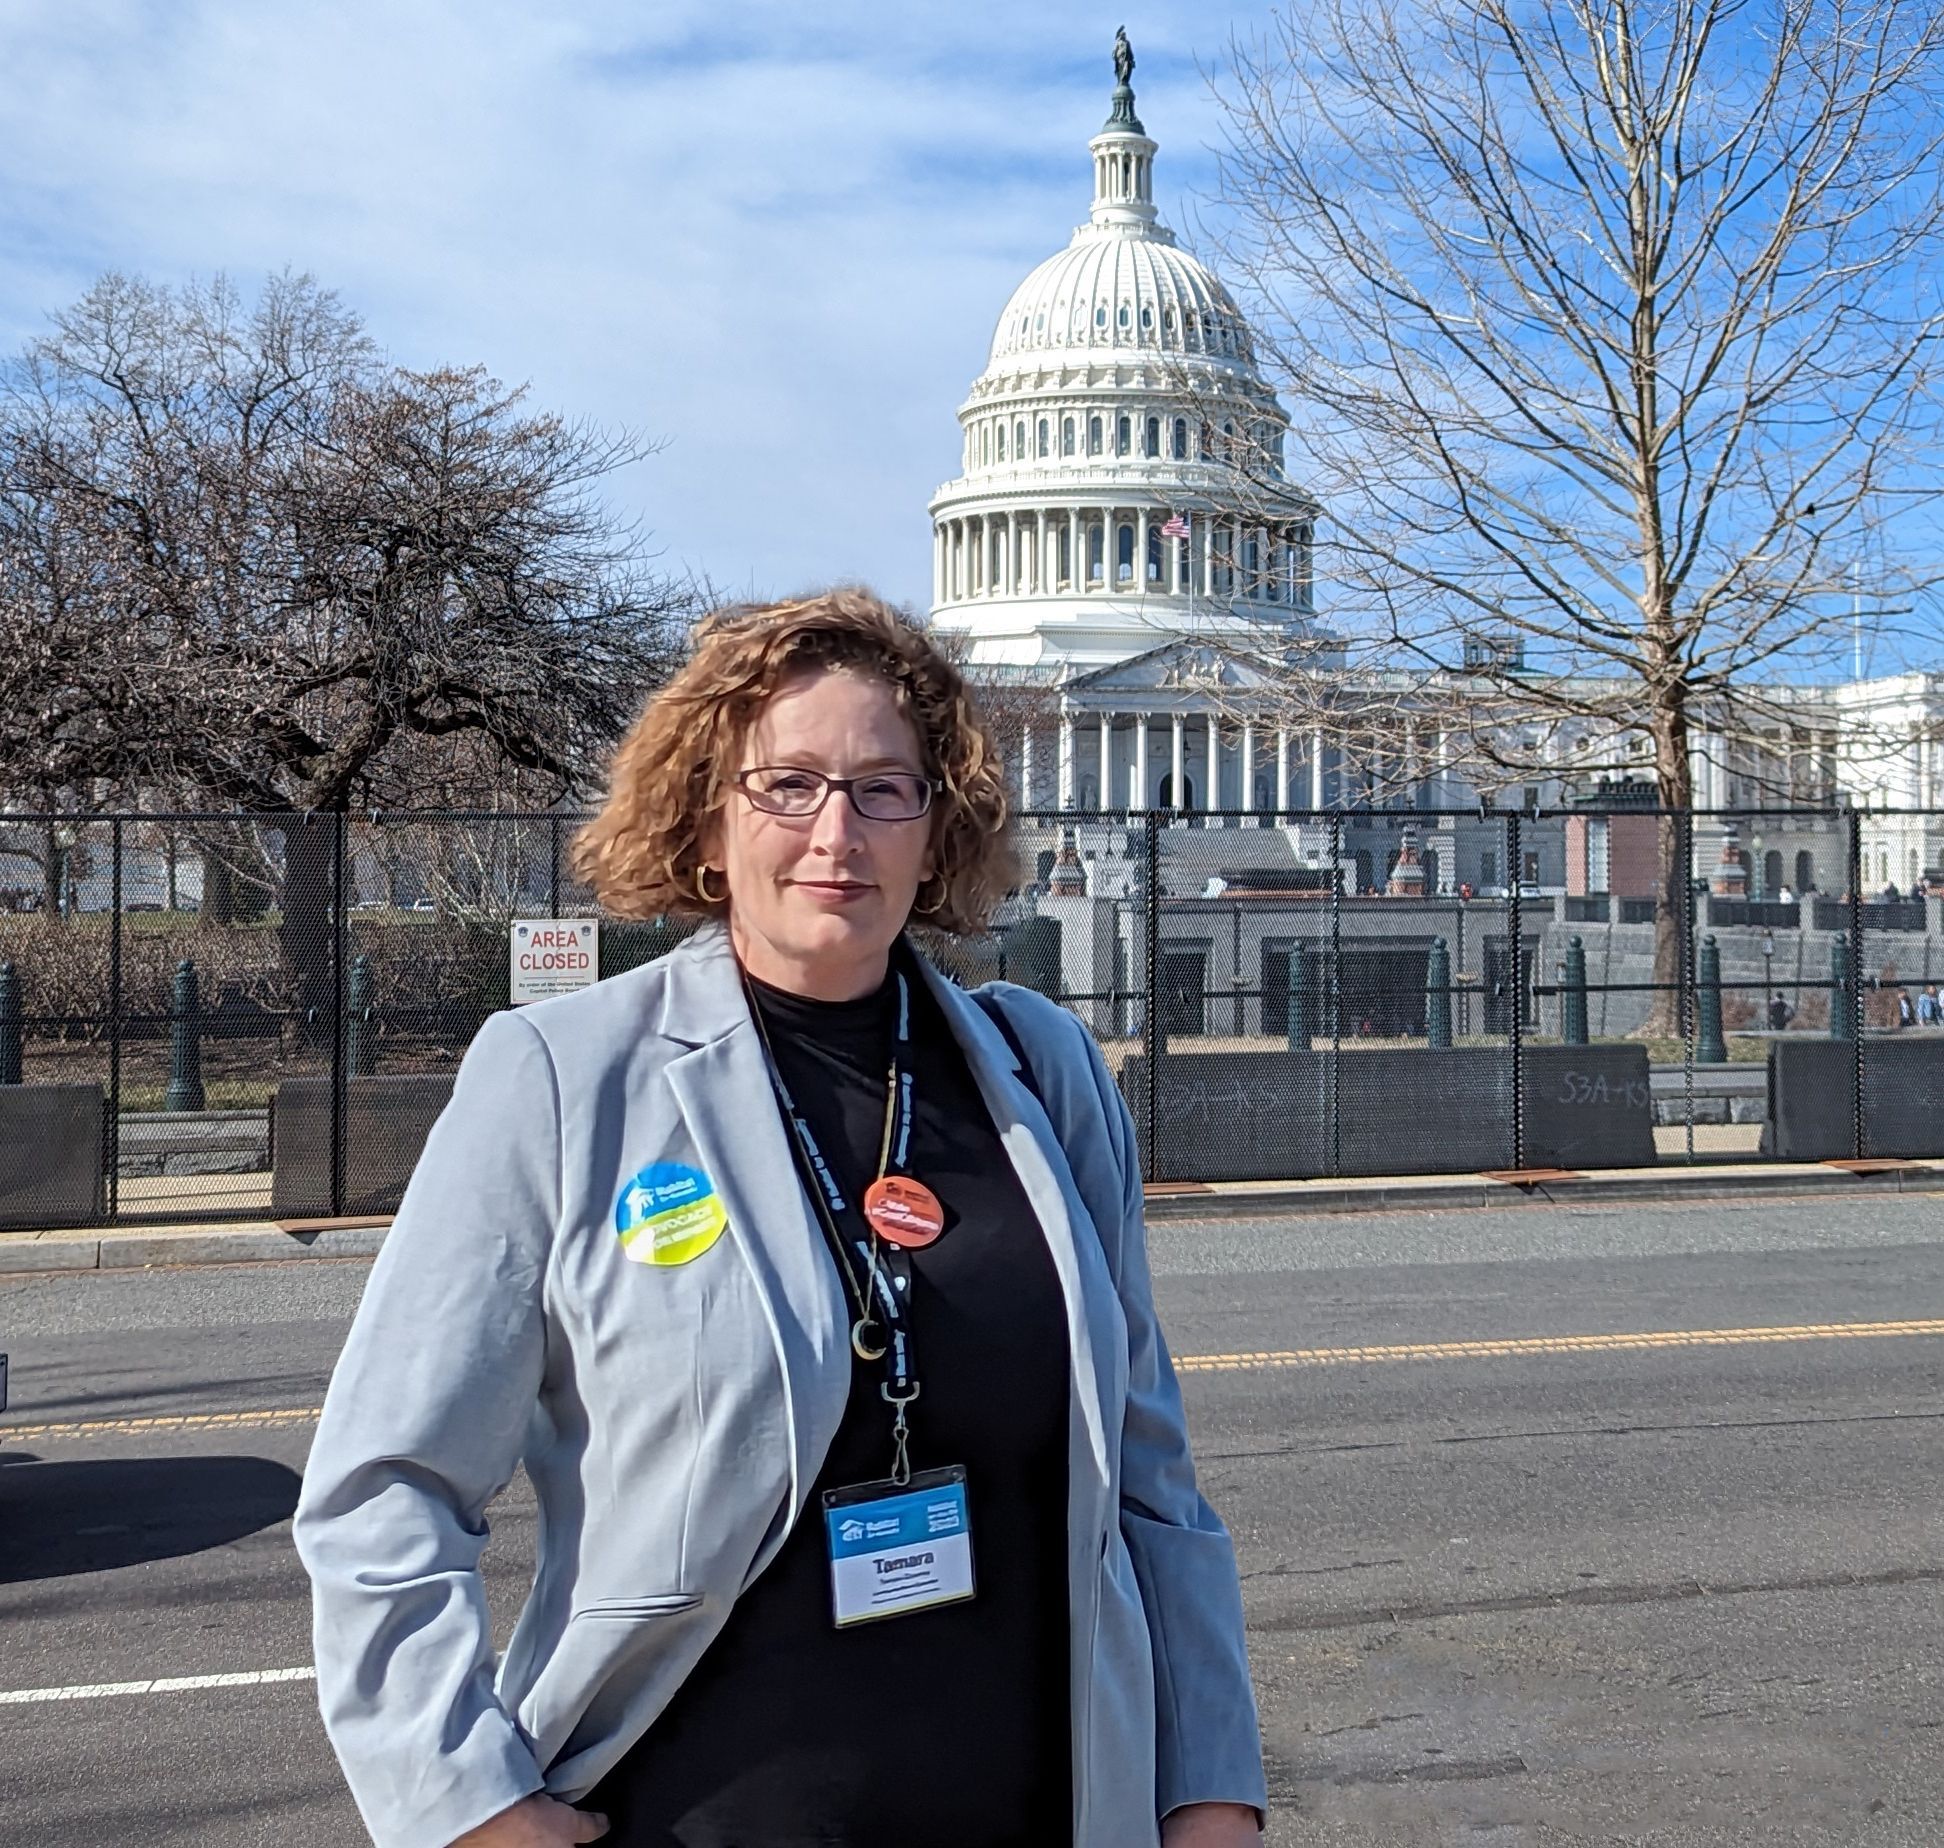 A person stands confidently before the United States Capitol Building. With a name badge and advocacy buttons, their poised demeanor suggests participation in a significant event related to legislative advocacy.